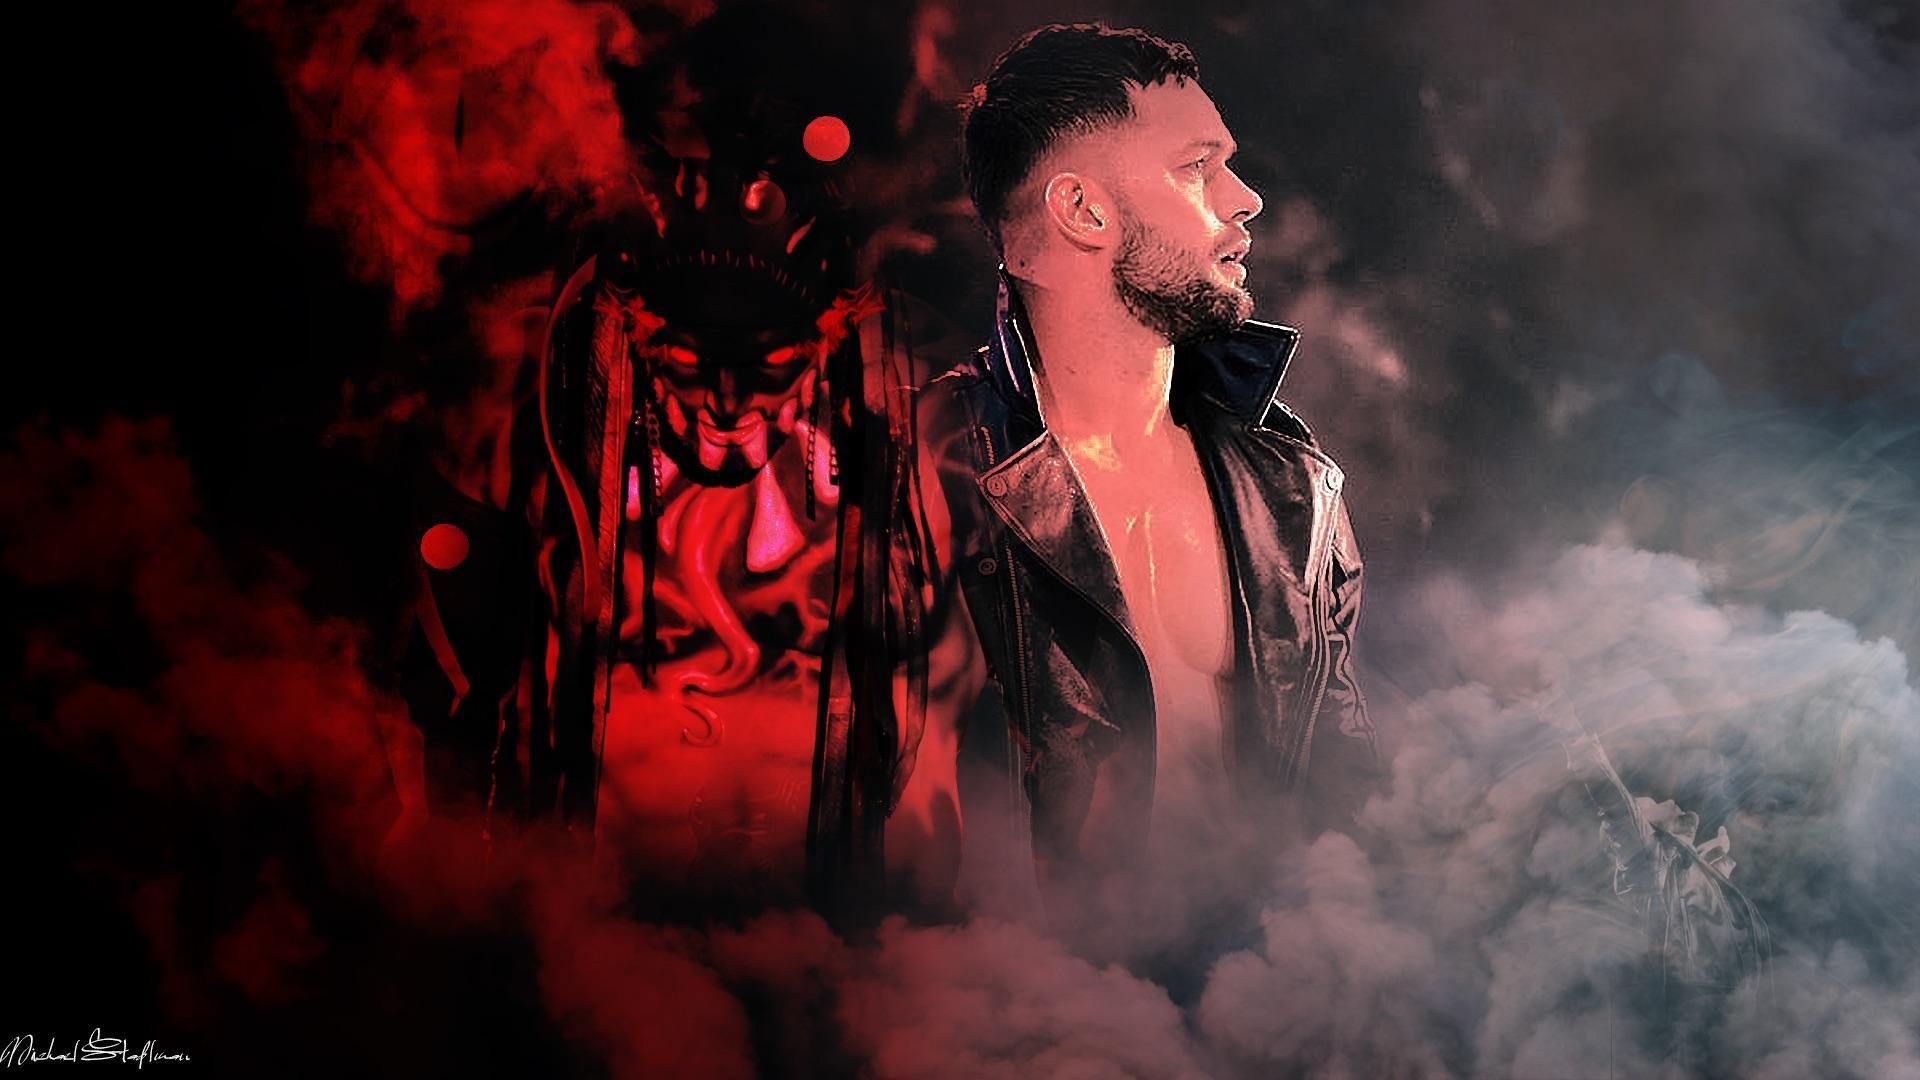 Finn Balor "Two Sides to Every Demon" Wallpapers I've been w...